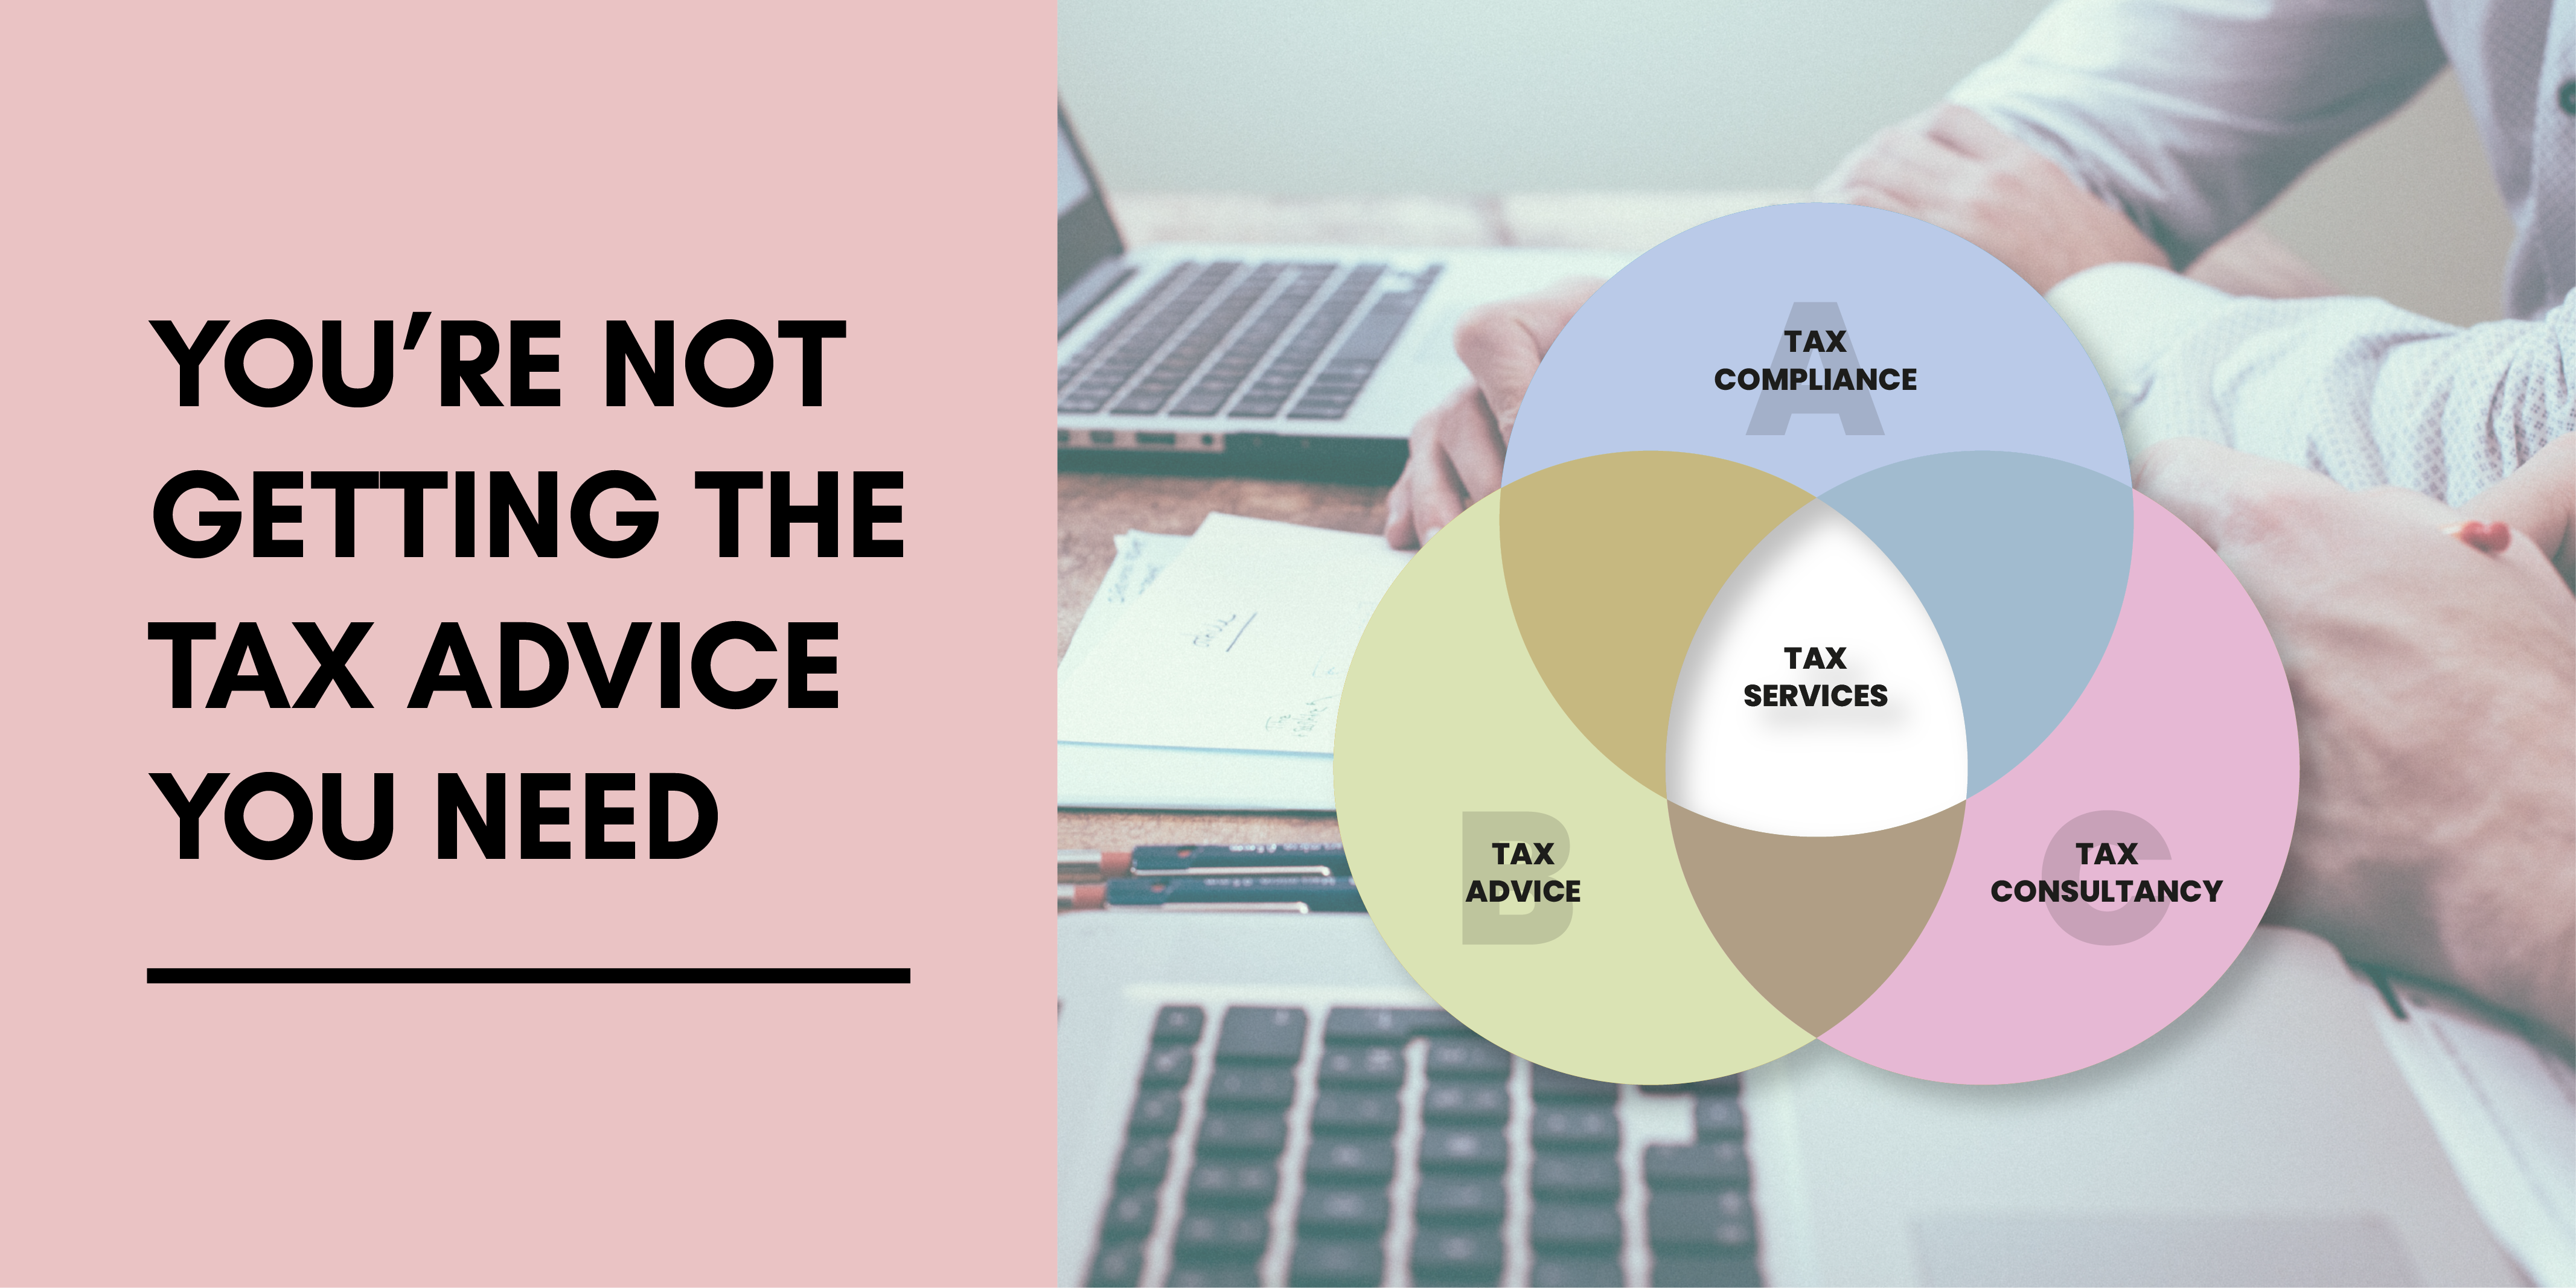 Infographic showing the 3 types of tax services offered by Pie Accounts